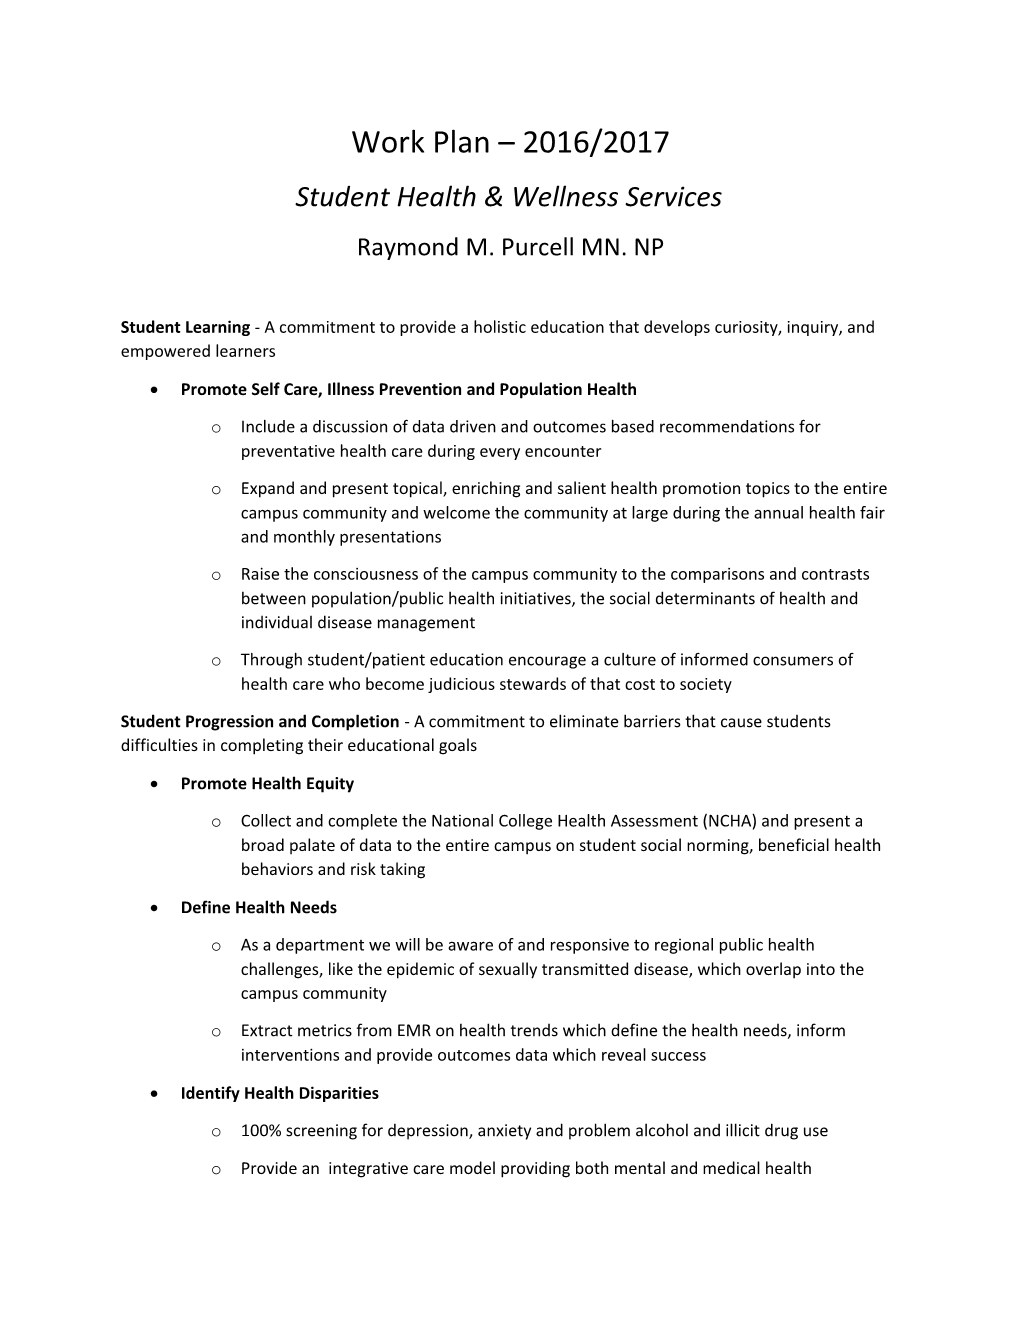 Student Health & Wellness Services